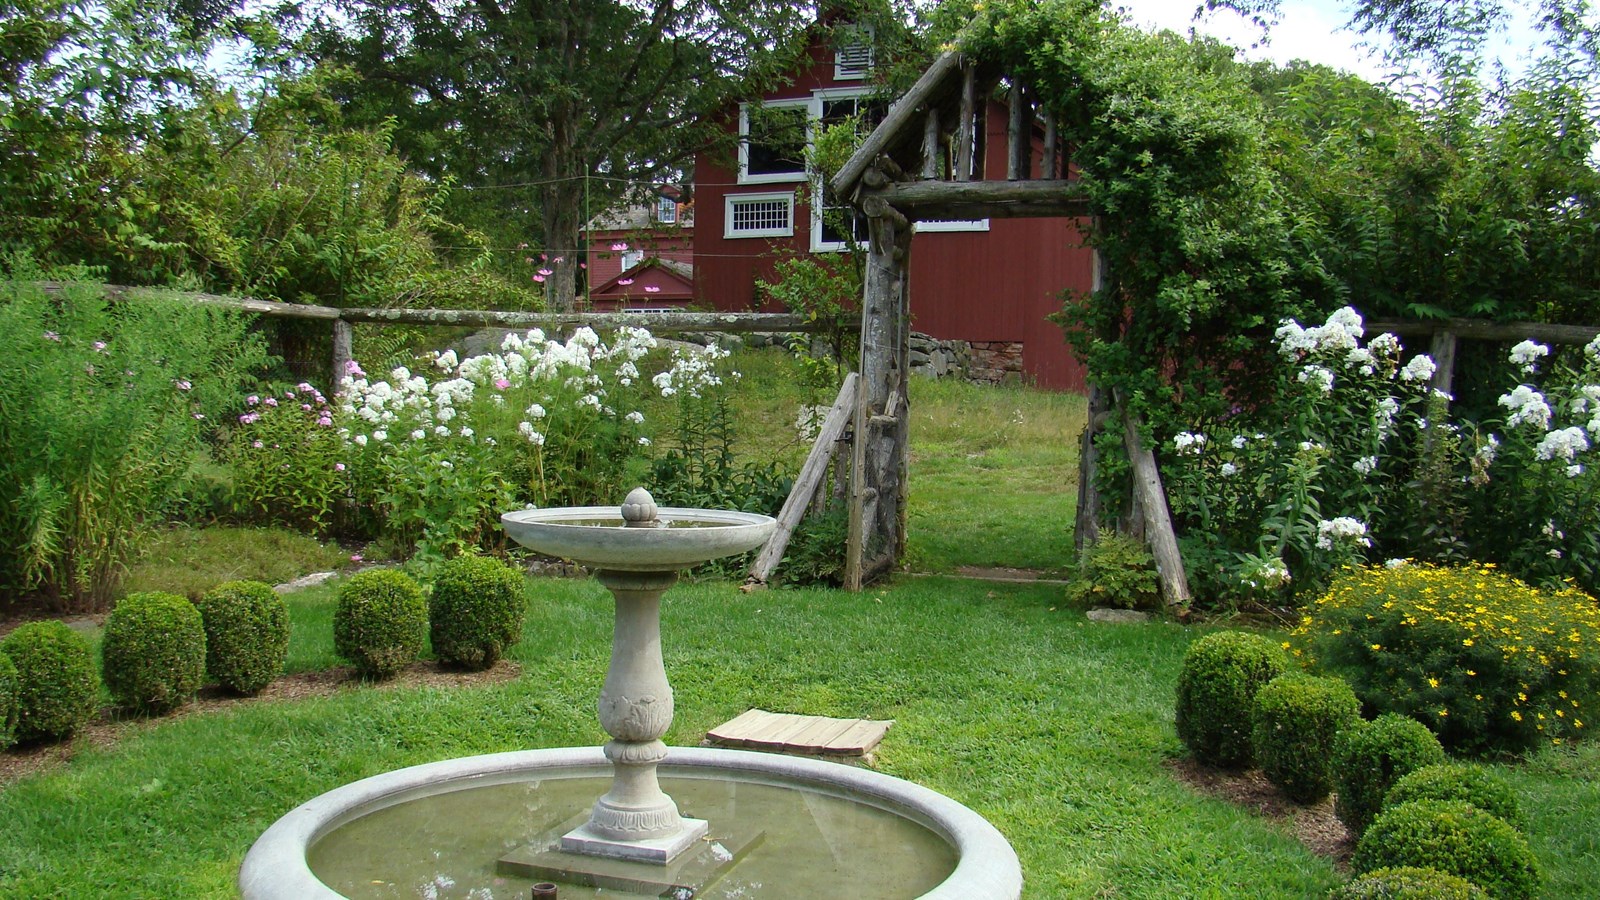 A water fountain in the middle surrounded by small green bushes and a wooden gate in the background.